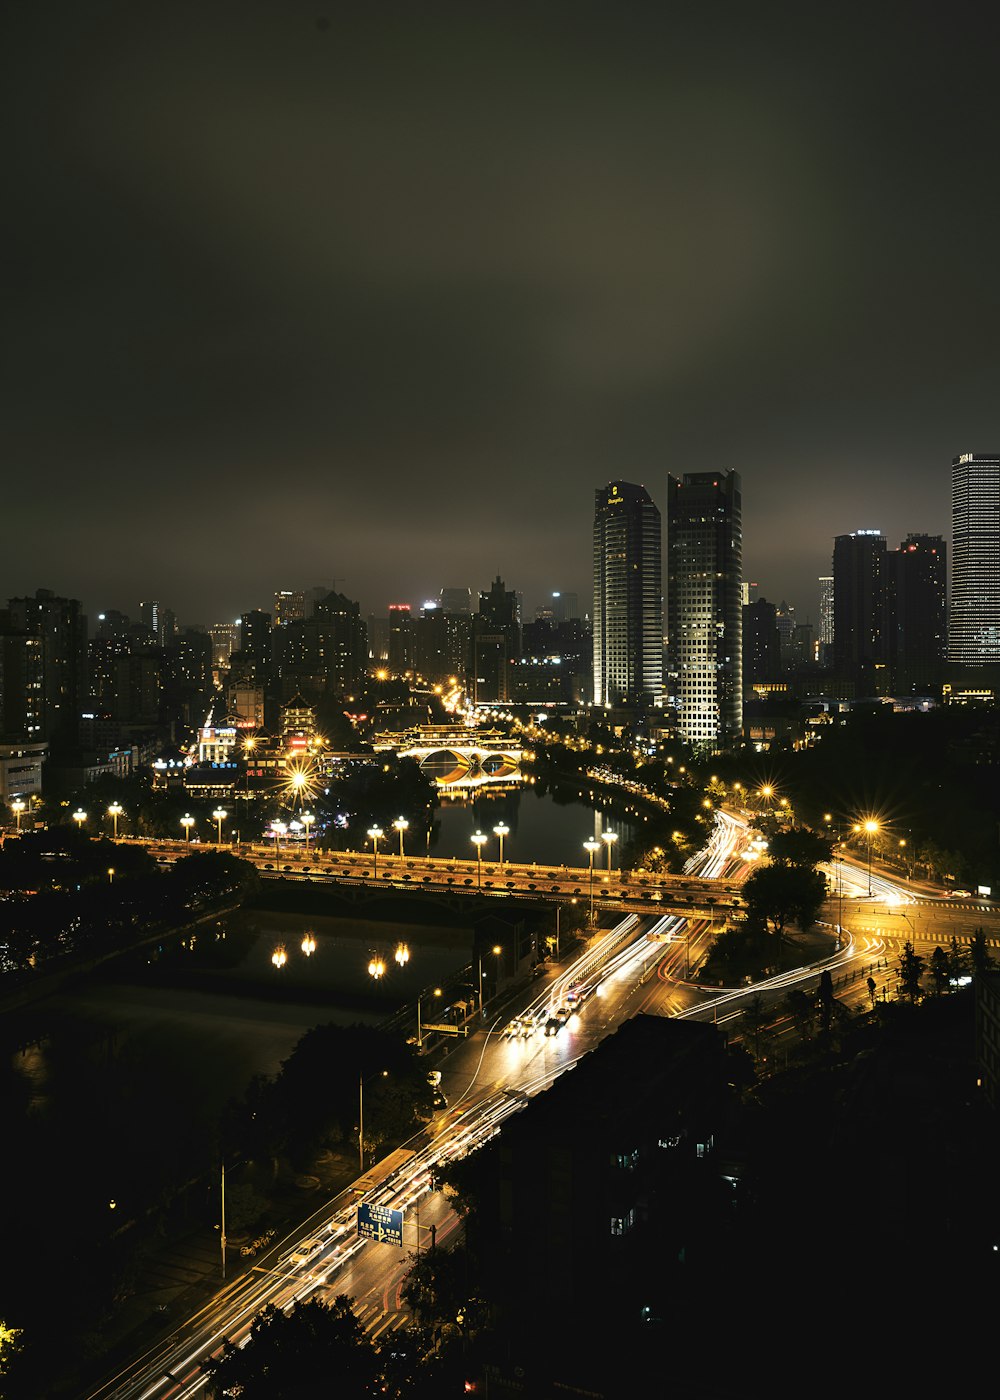 city with high rise buildings during night time